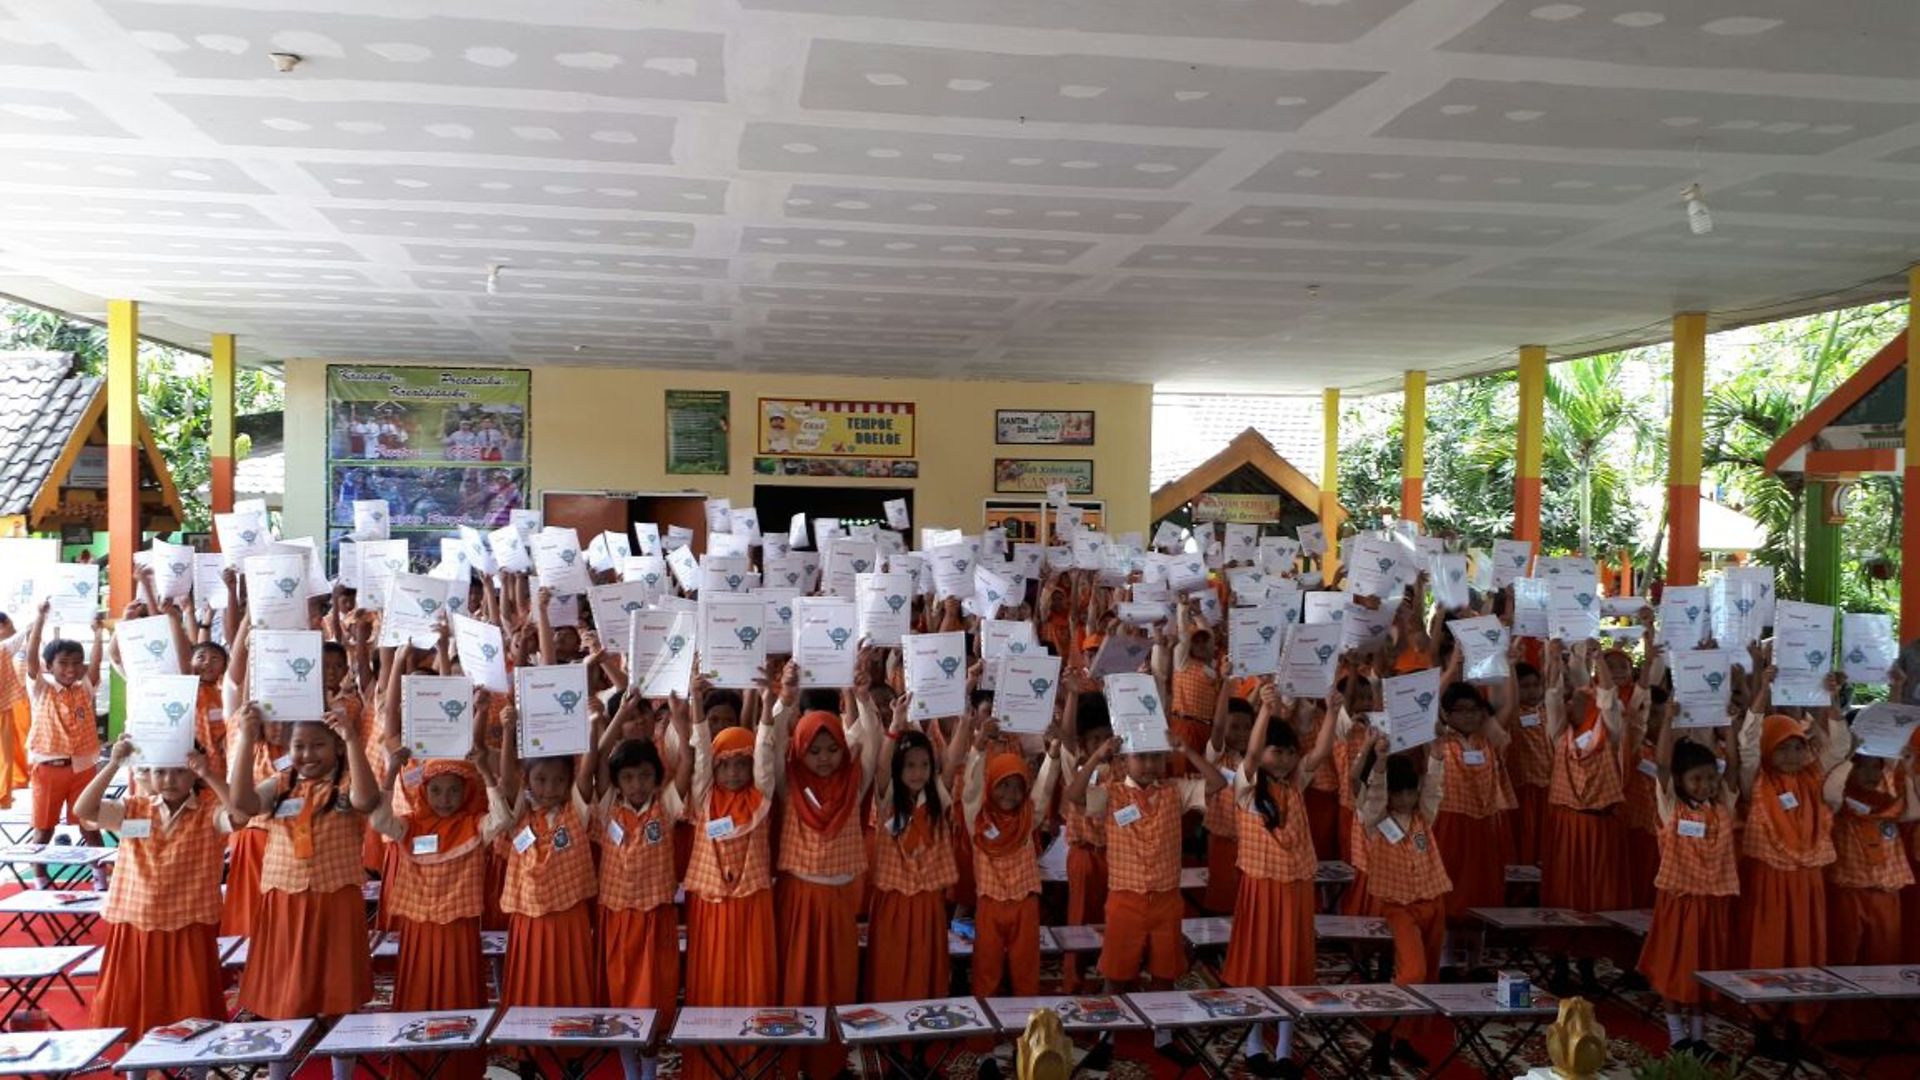 Nearly 250 students from SDN Dermo 1 in Pasuruan have been certifed as Sustainability Champions after completing Henkel’s Sustainability Ambassador School Outreach program. 